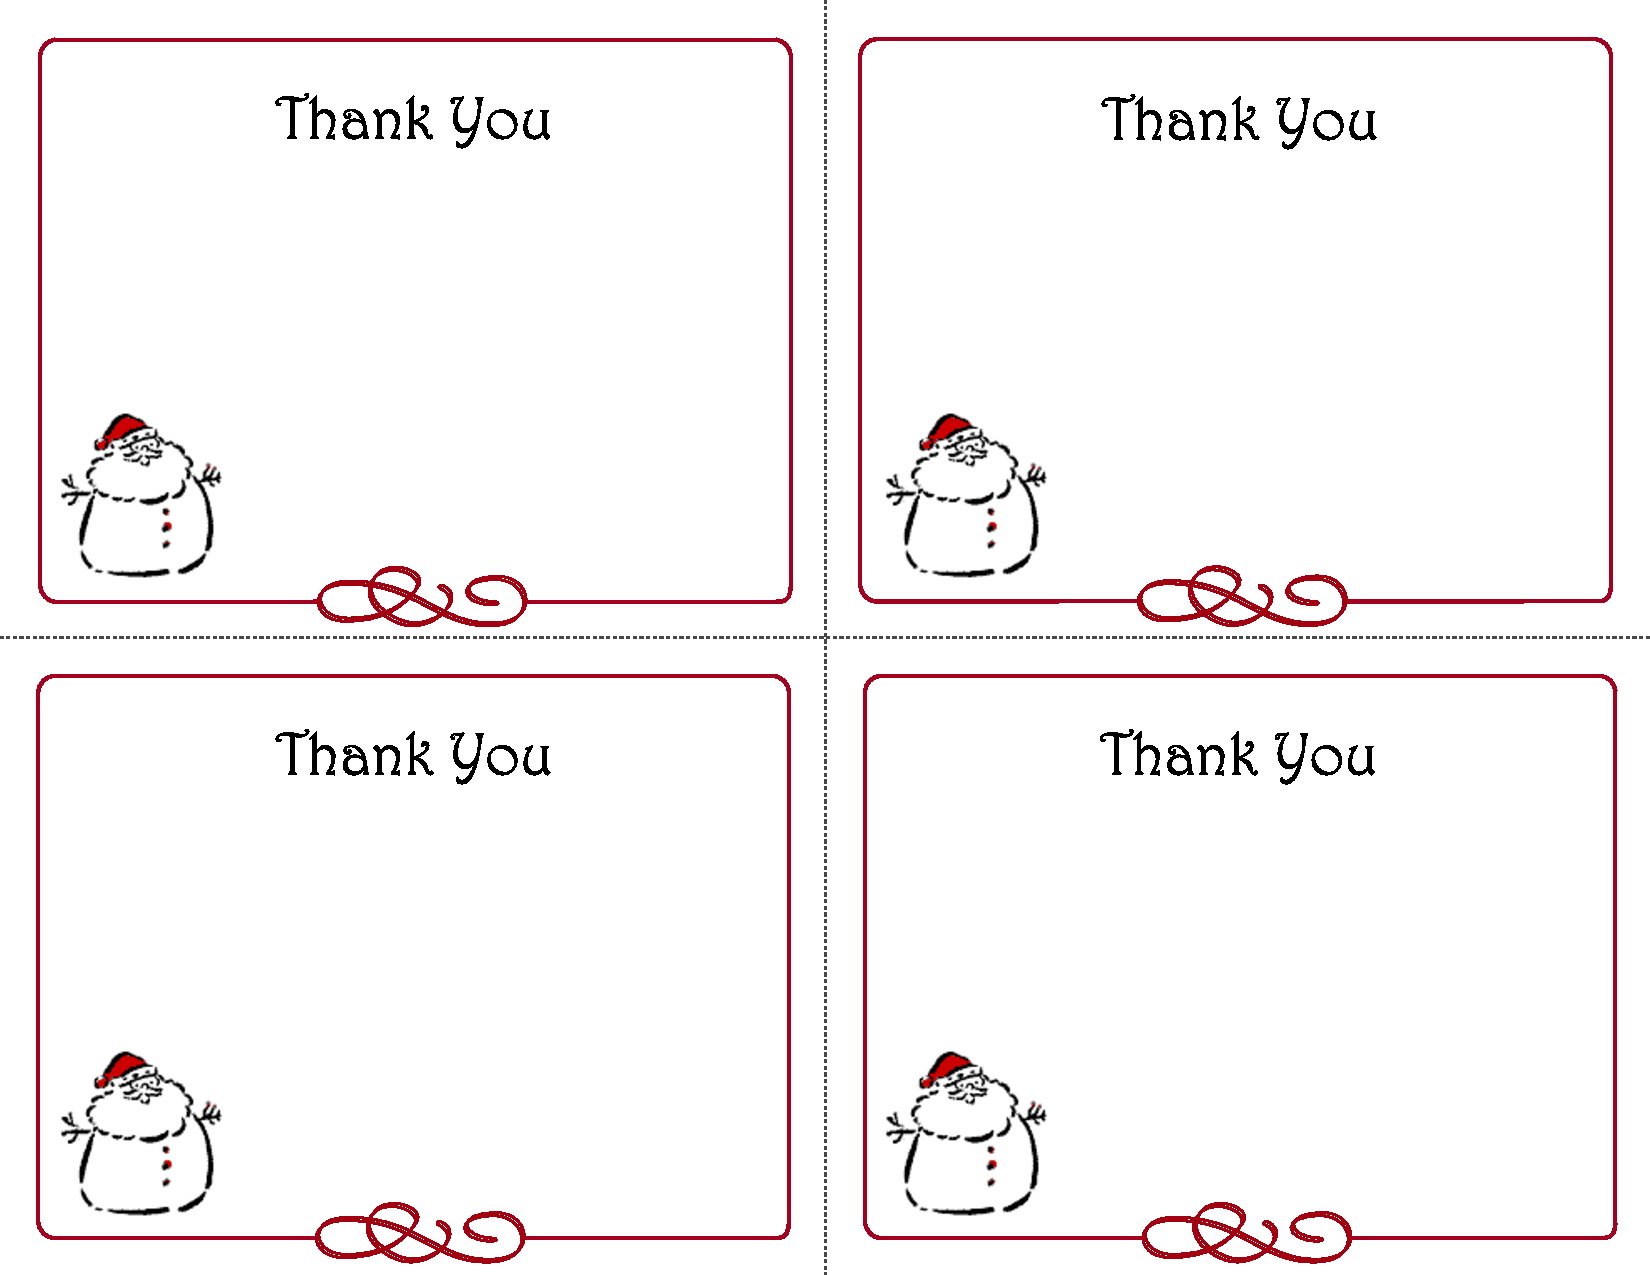 Free Thank You Cards Printable | Free Printable Holiday Gift For Template For Cards To Print Free